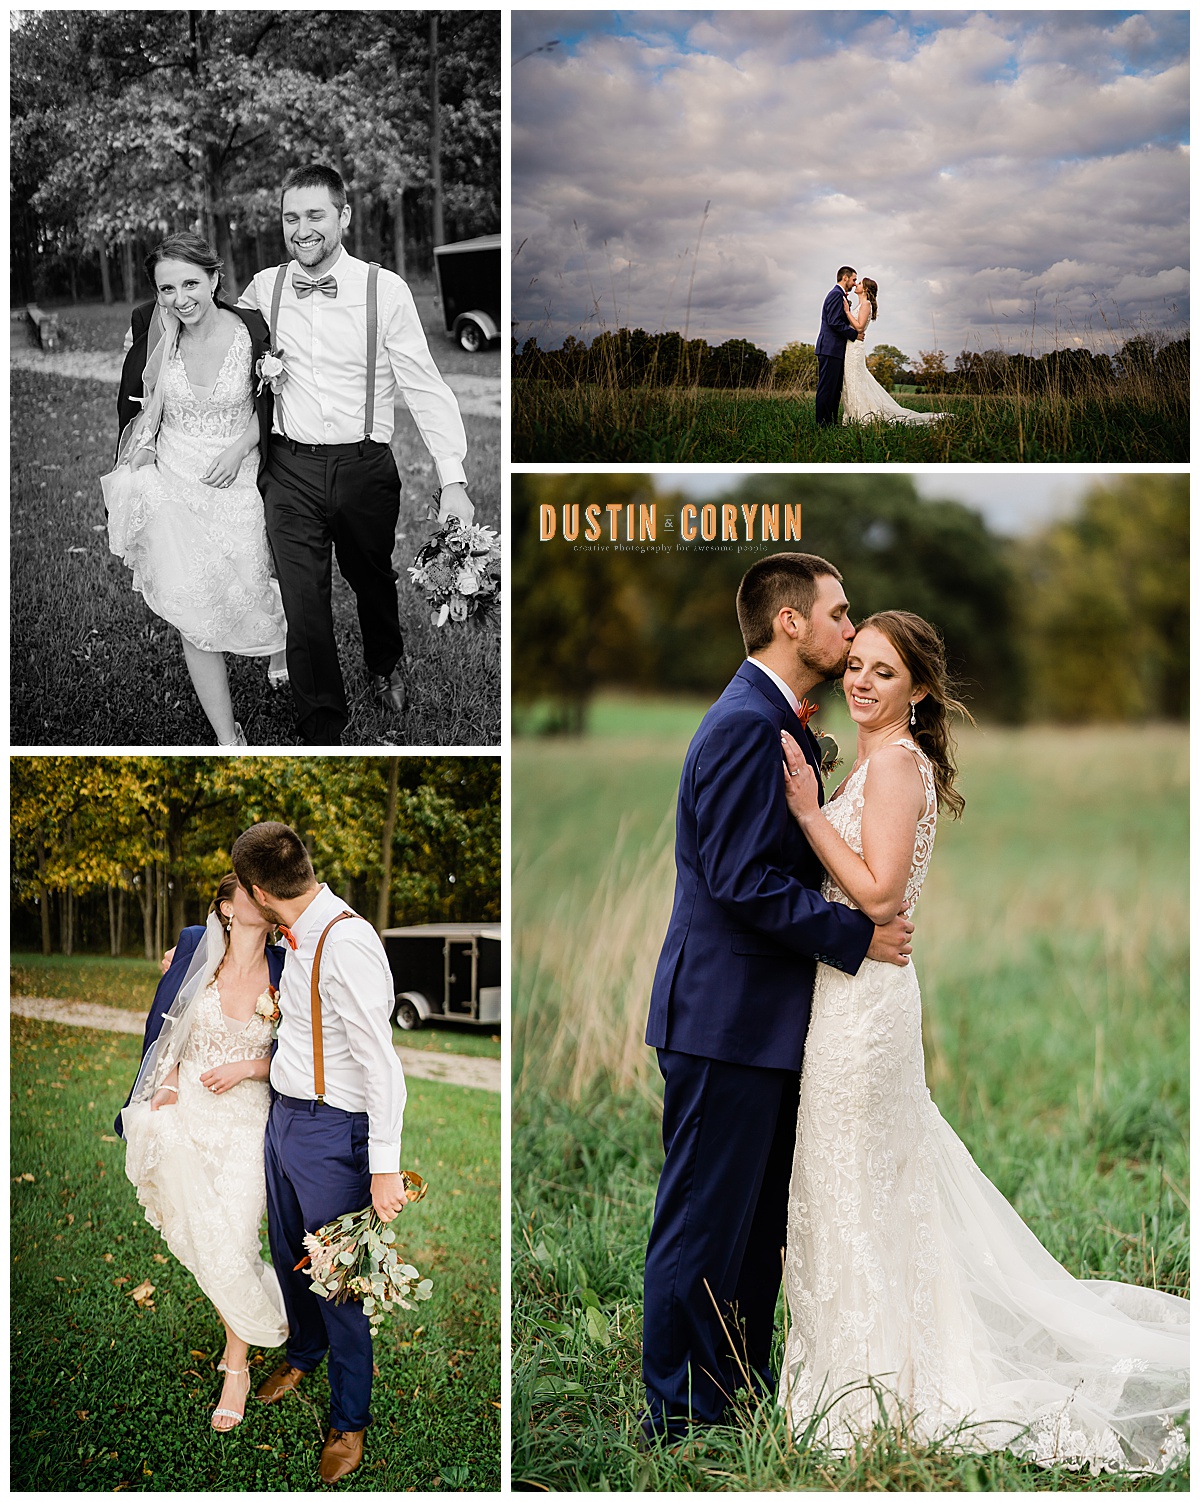 bride and groom have outdoor wedding photos in Indiana as they walk through a field together